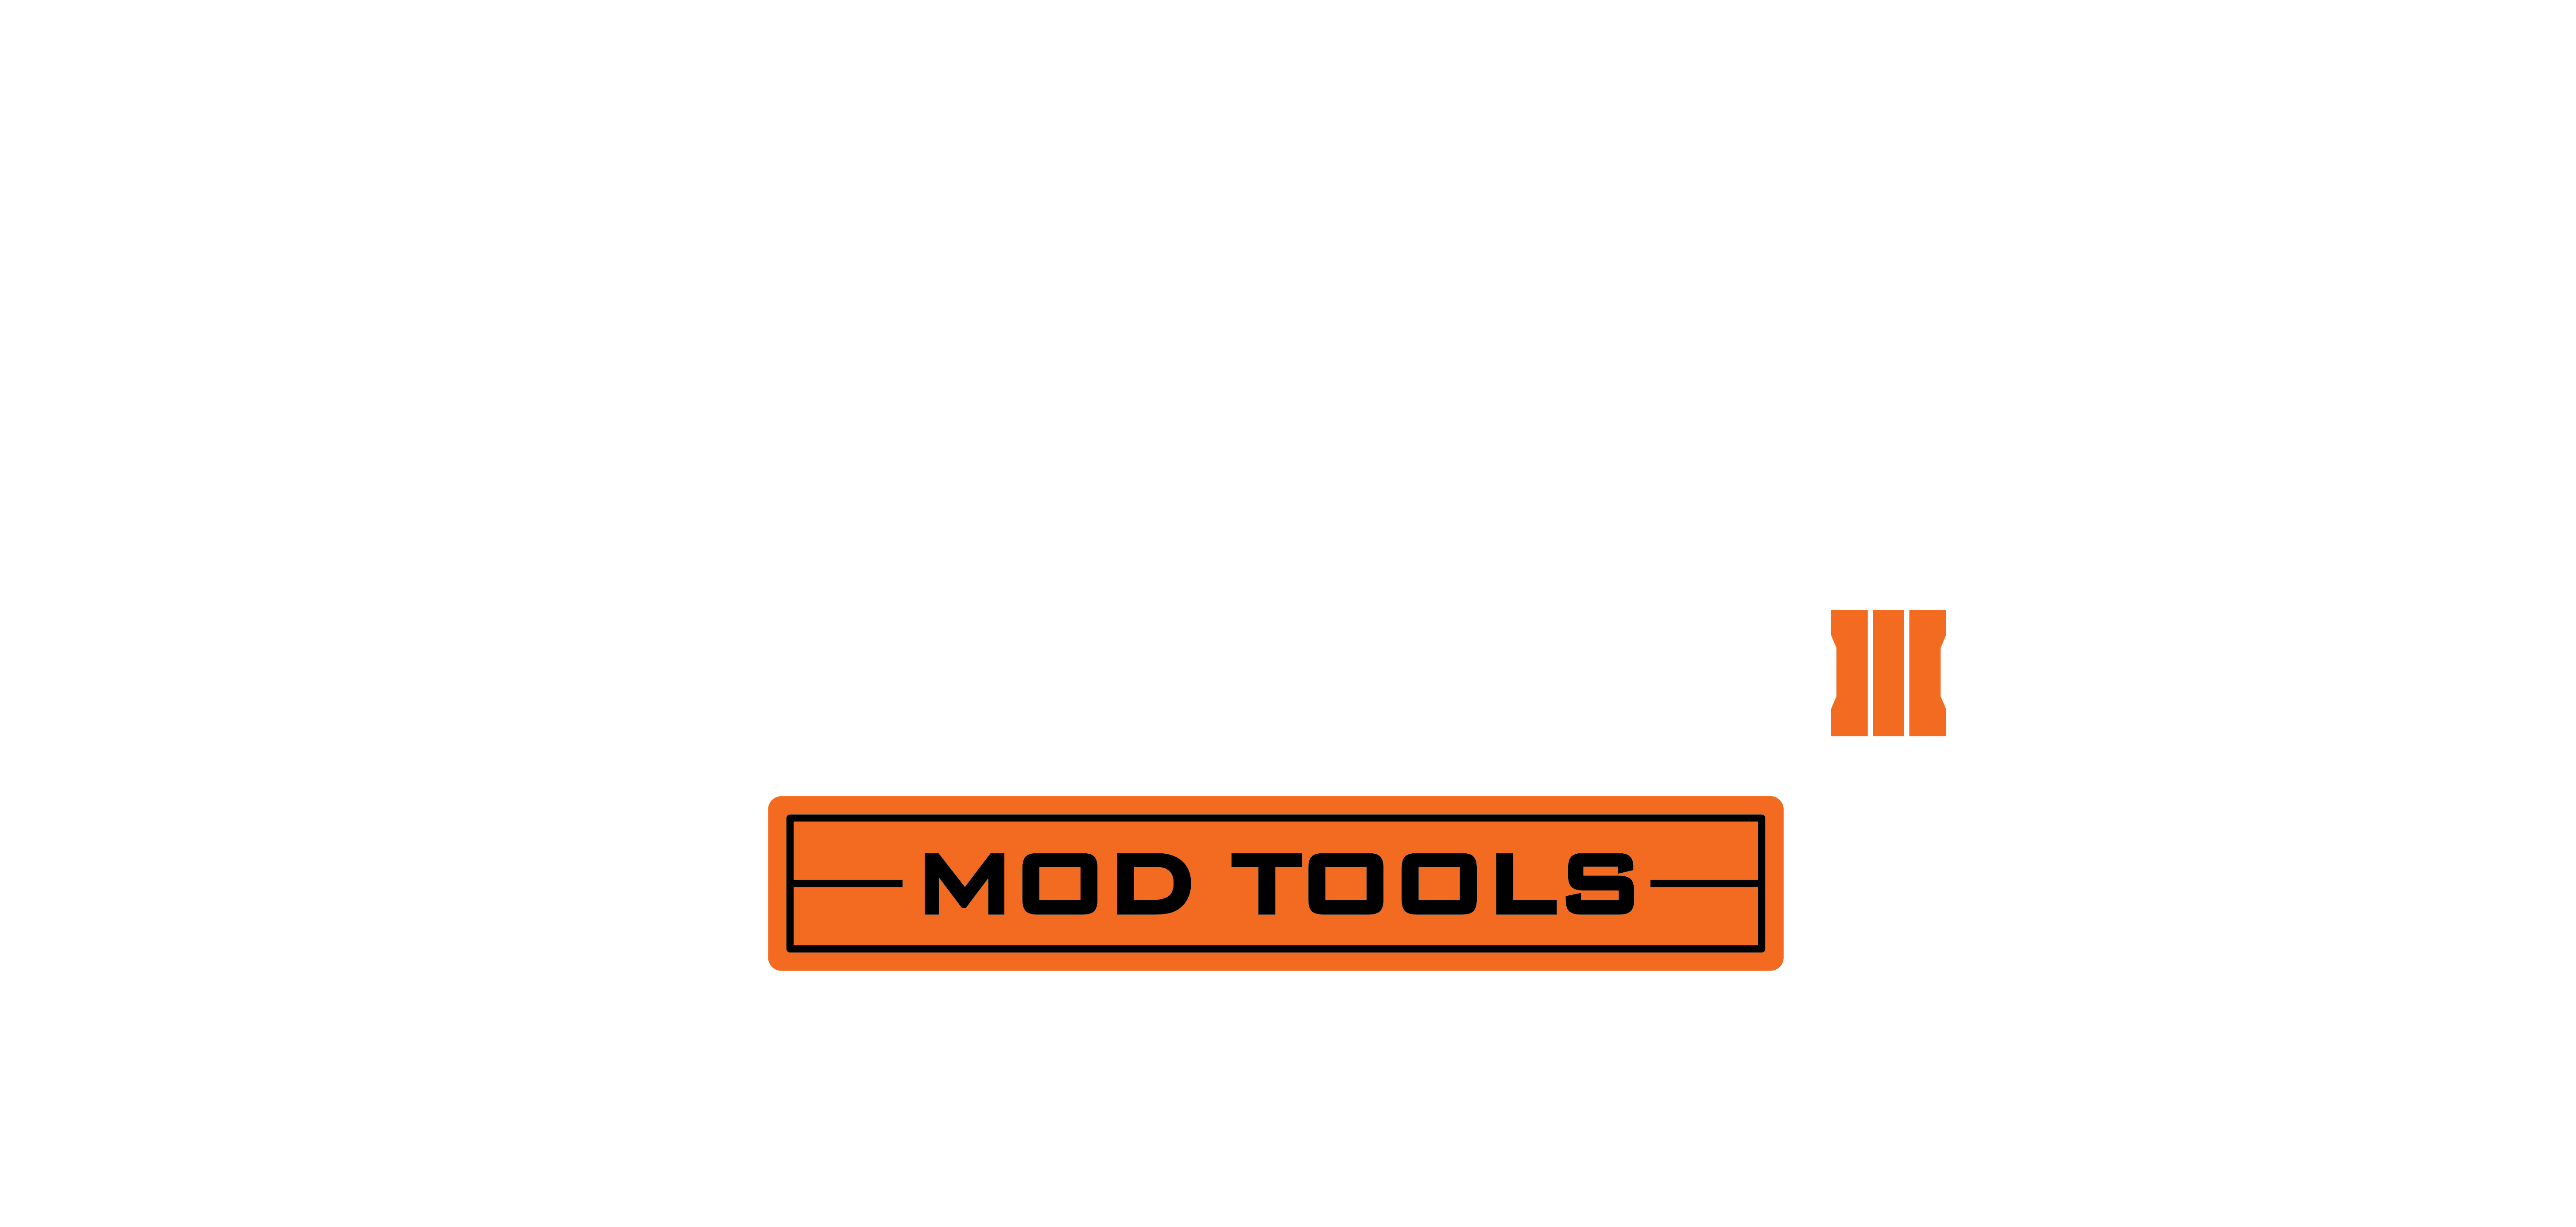 black ops 3 mod tool without steam